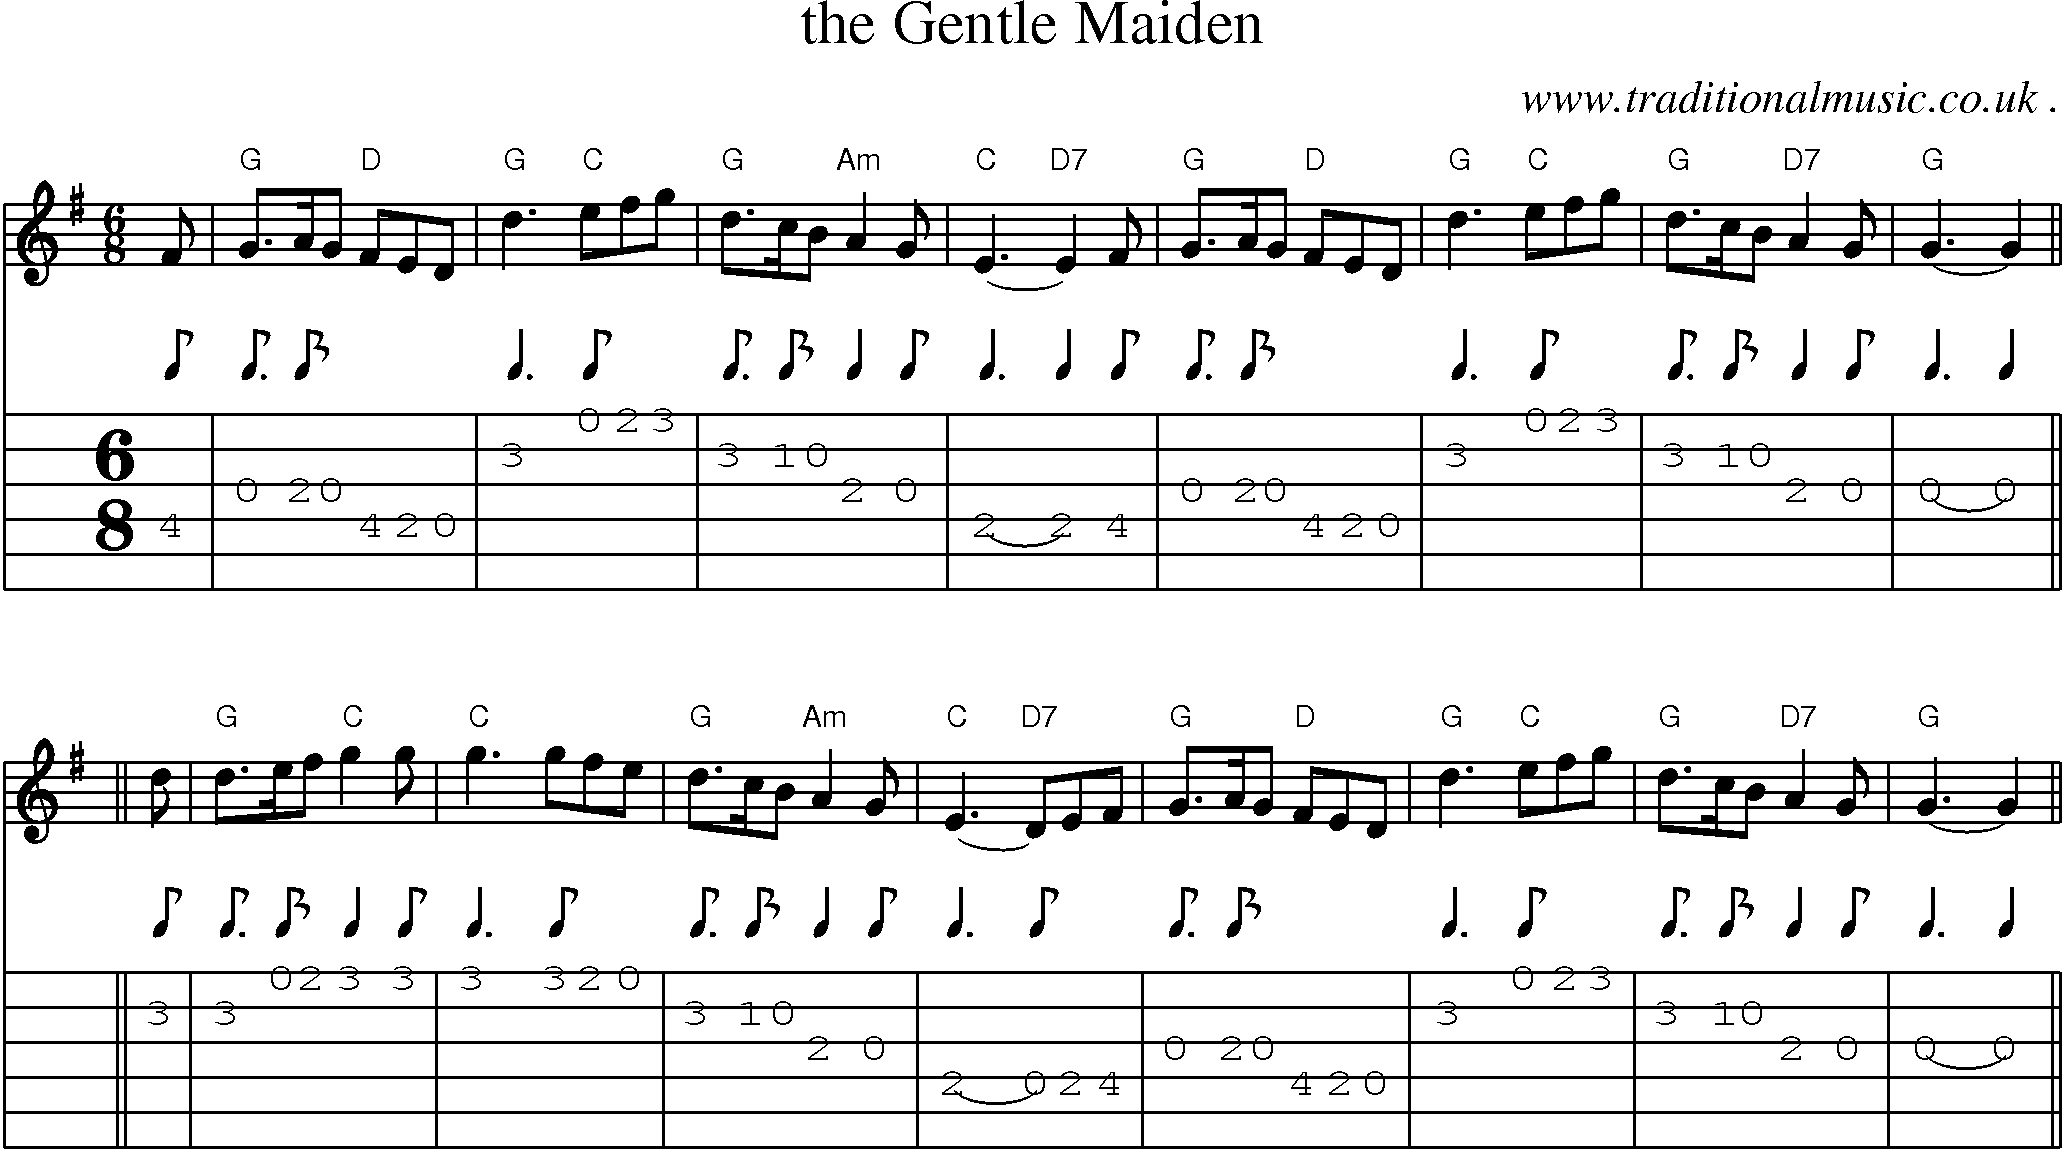 Sheet-music  score, Chords and Guitar Tabs for The Gentle Maiden